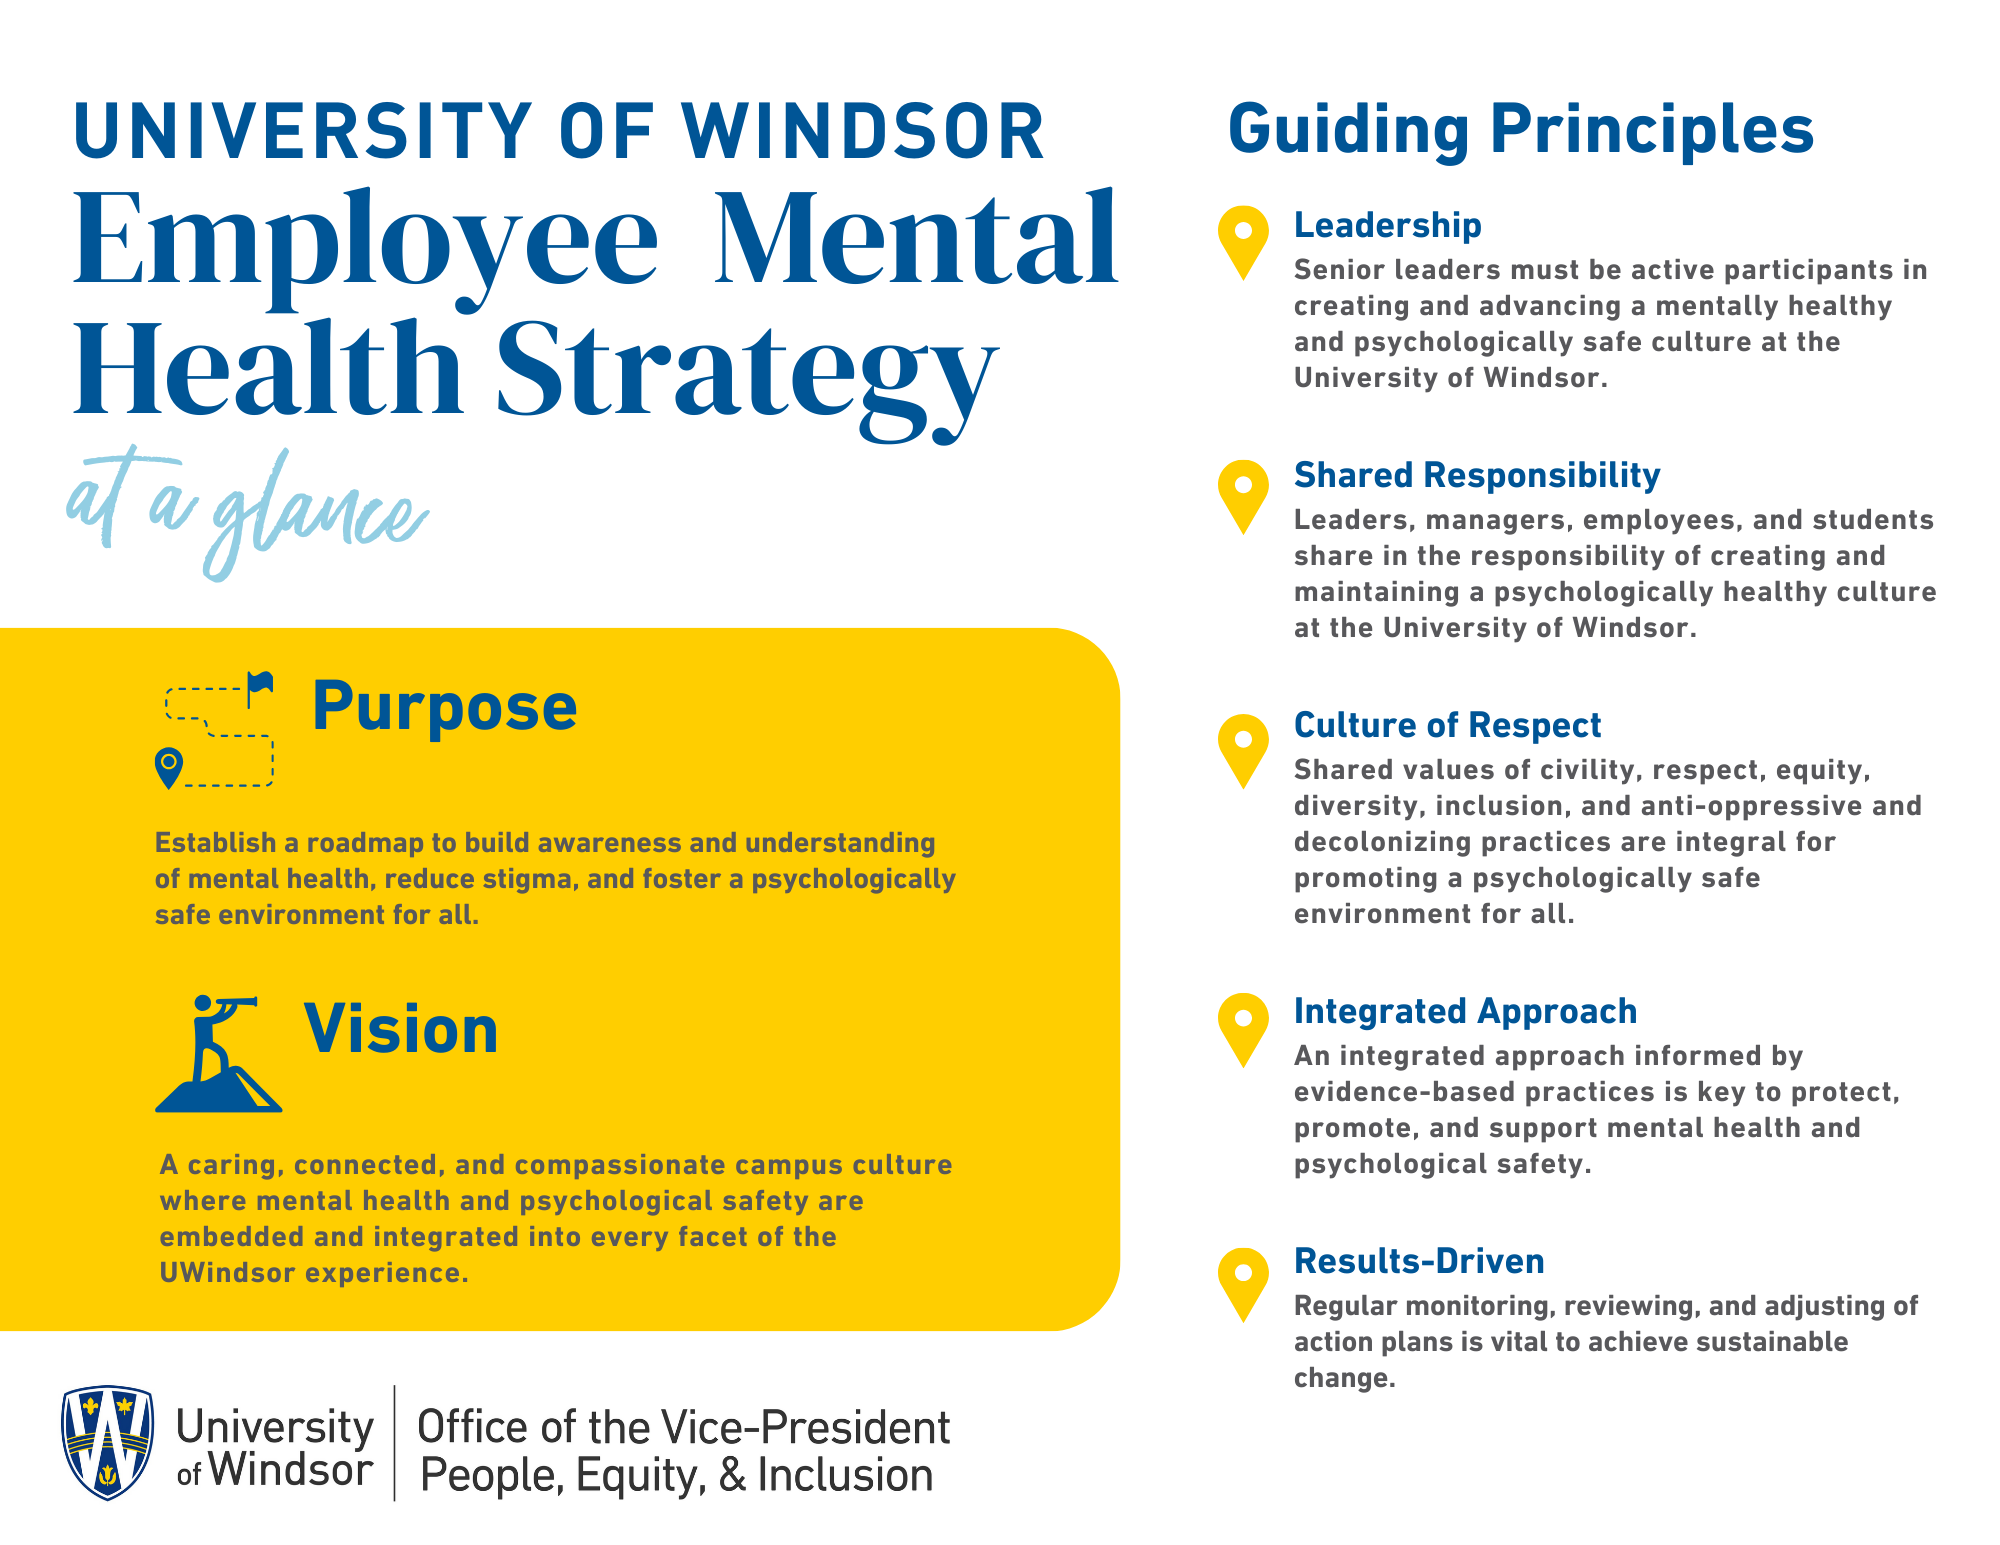 Thumbnail of Employee Mental Health Strategy at a Glance